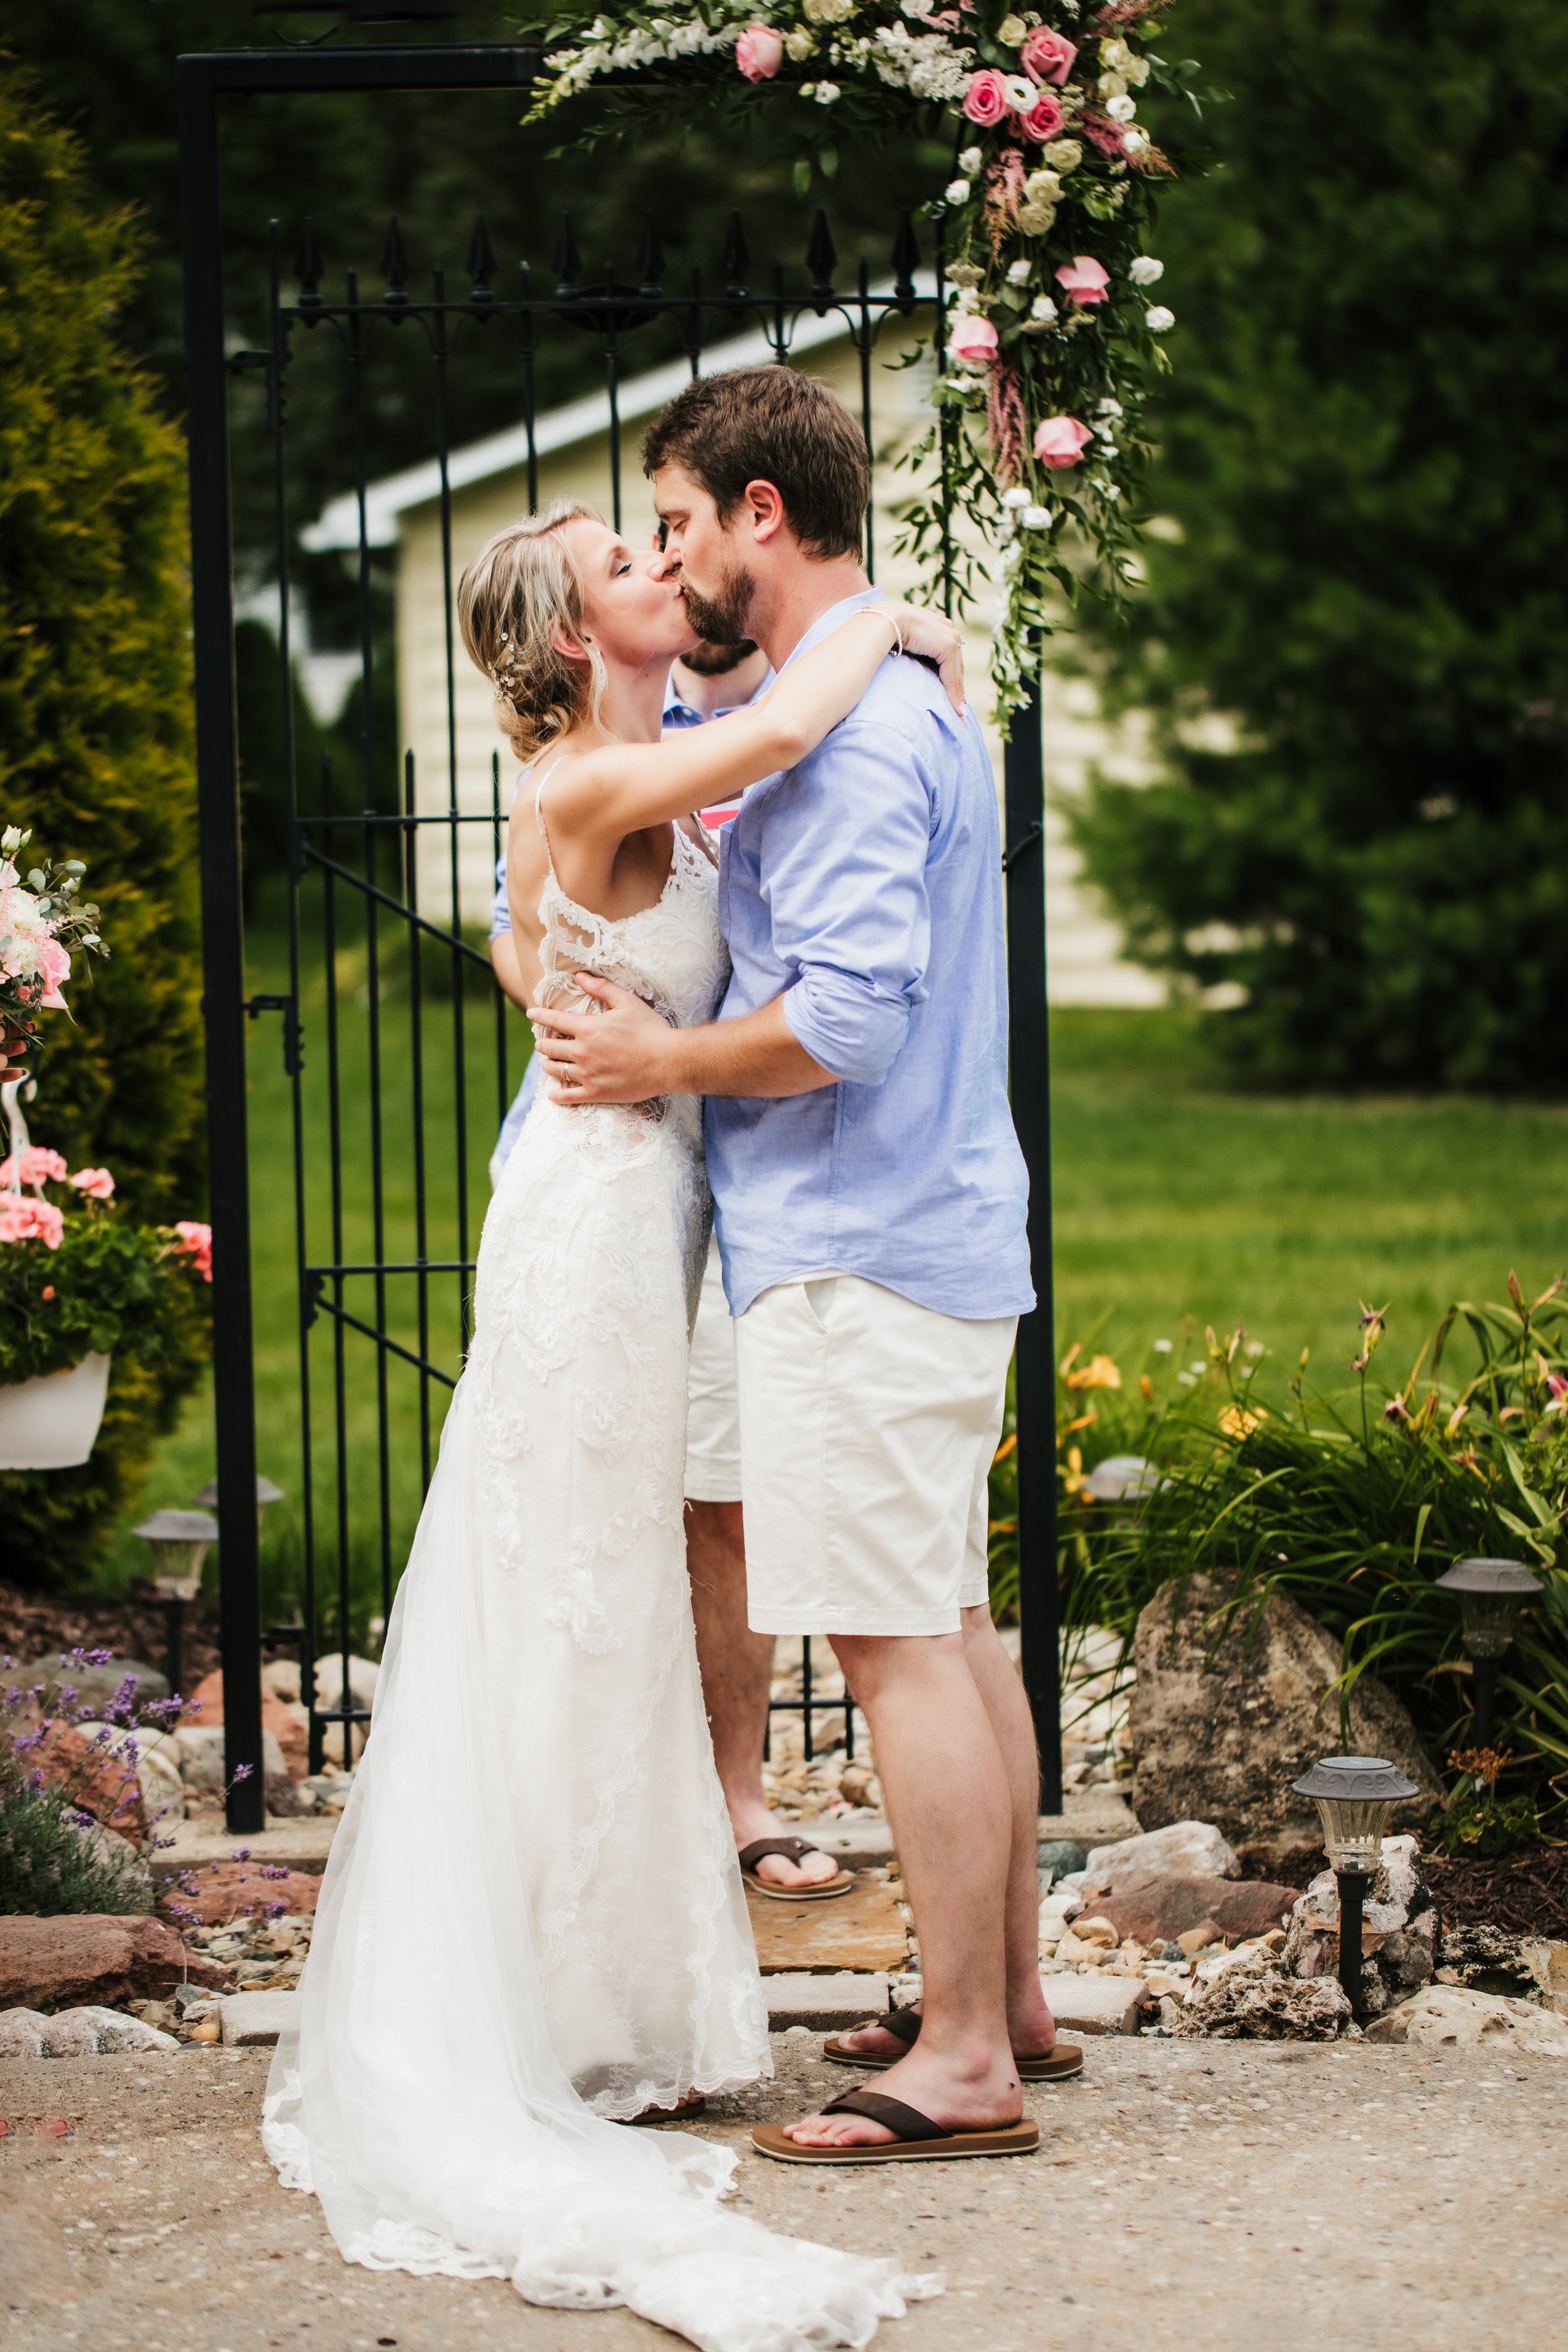  First kiss as husband and wife intimate wedding couple. bridal gown with lace and long train husband in blue button up and shorts #TealaWardPhotography #illinoisphotographer #princetonillinois #weddingphotographer #intimatewedding 